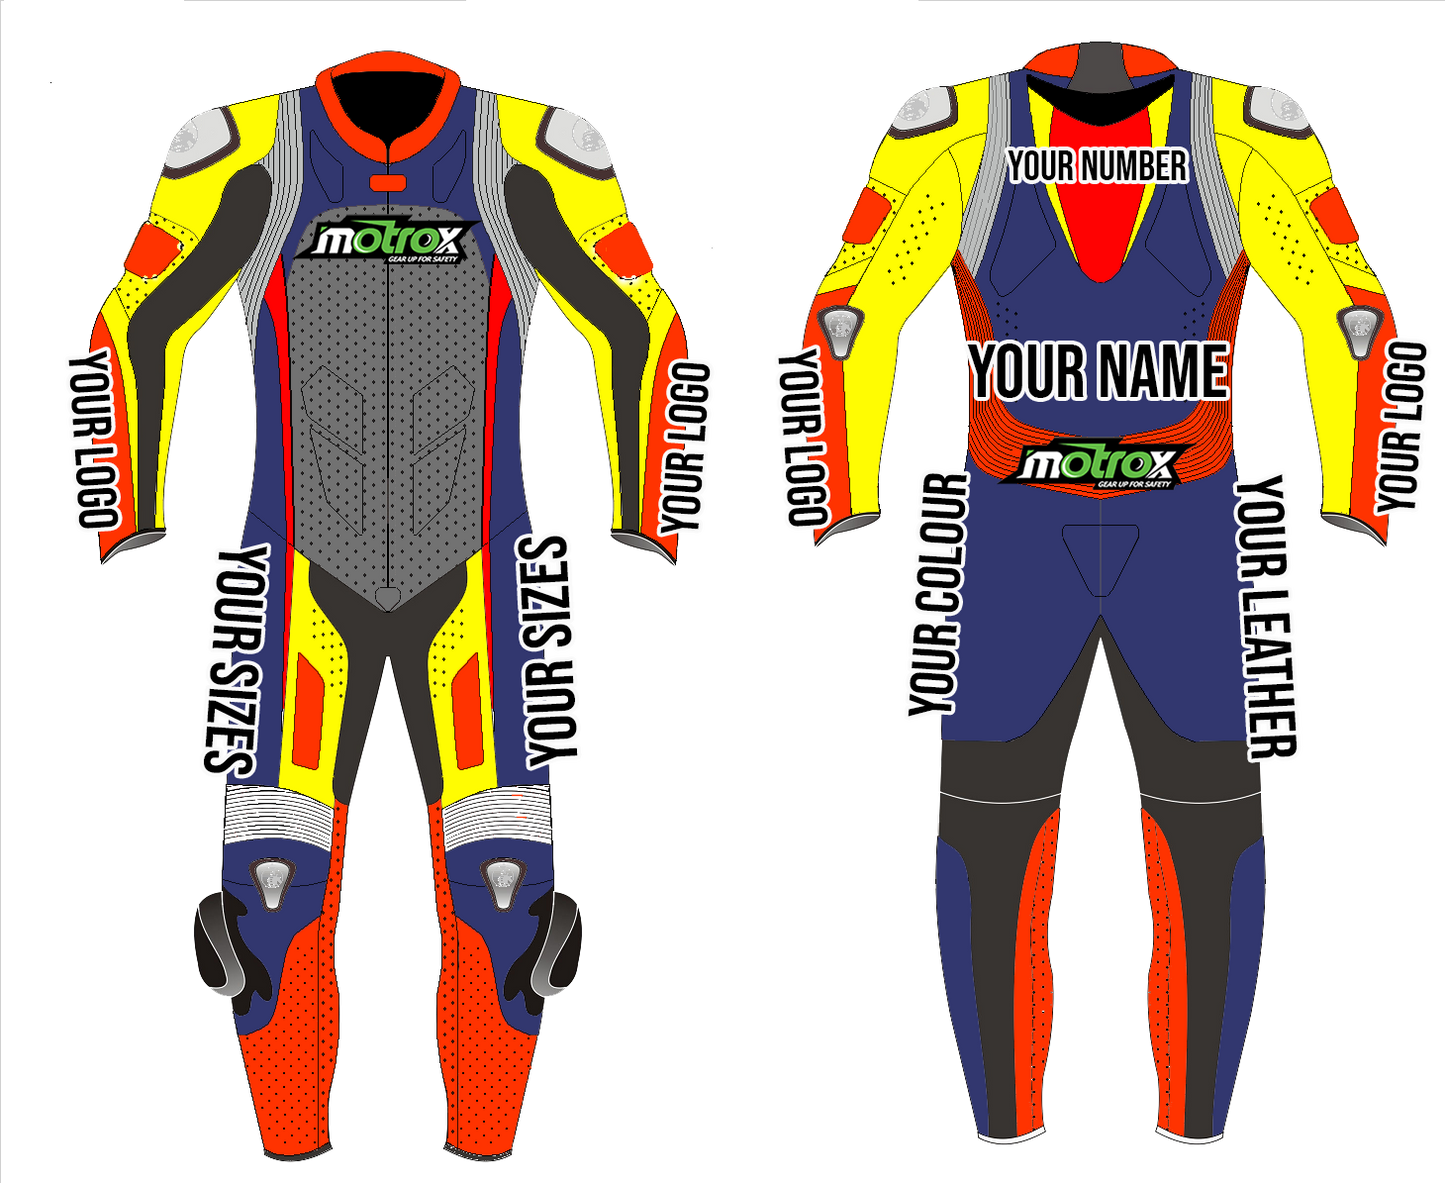 Customize Your Leather Design Your Own Racing Suit